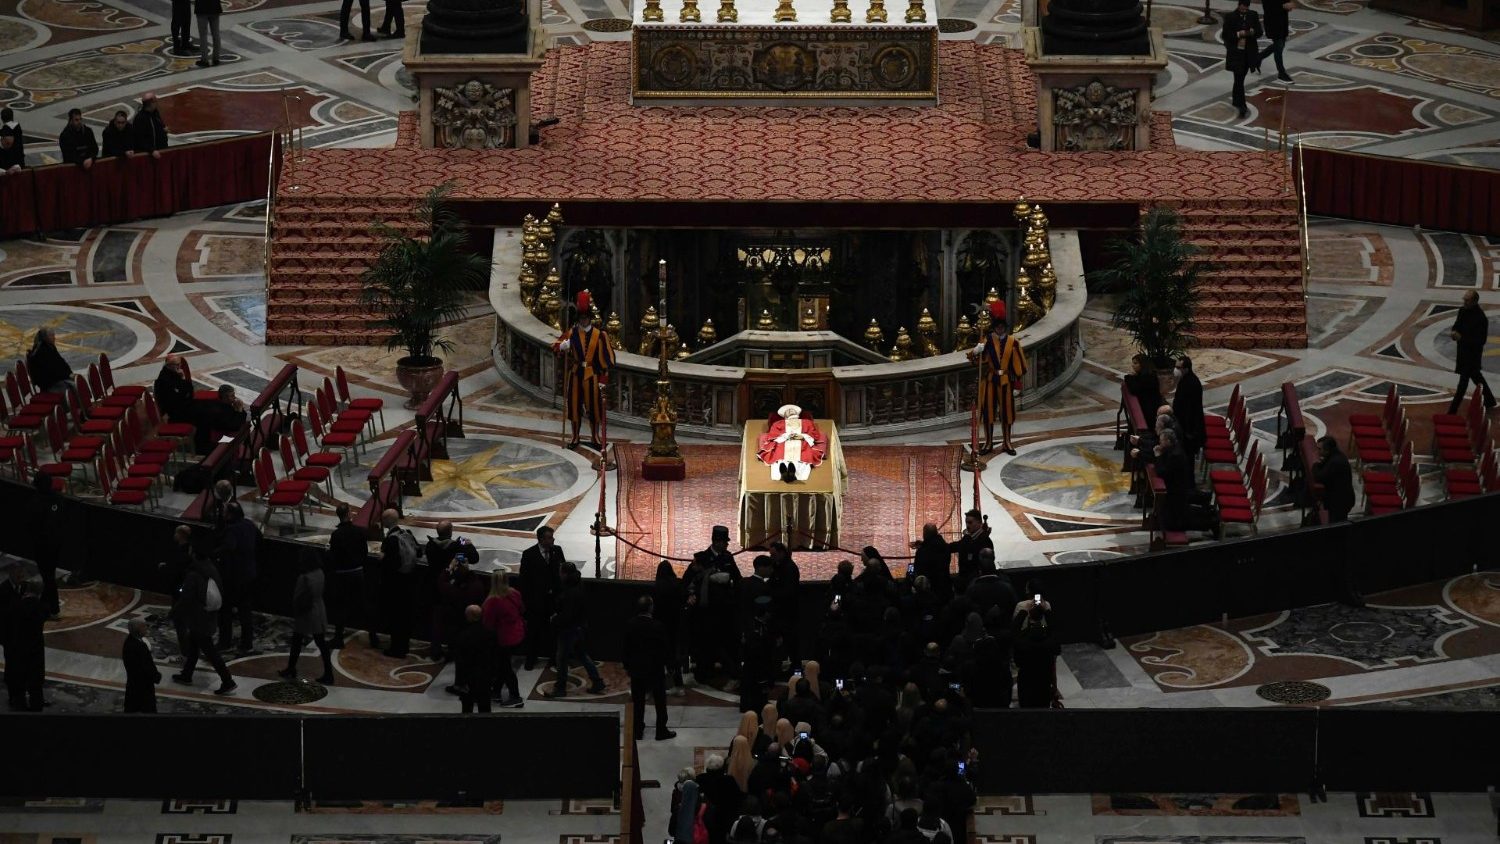 Benedict XVI’s body moved to St. Peter’s Basilica, thousands in line